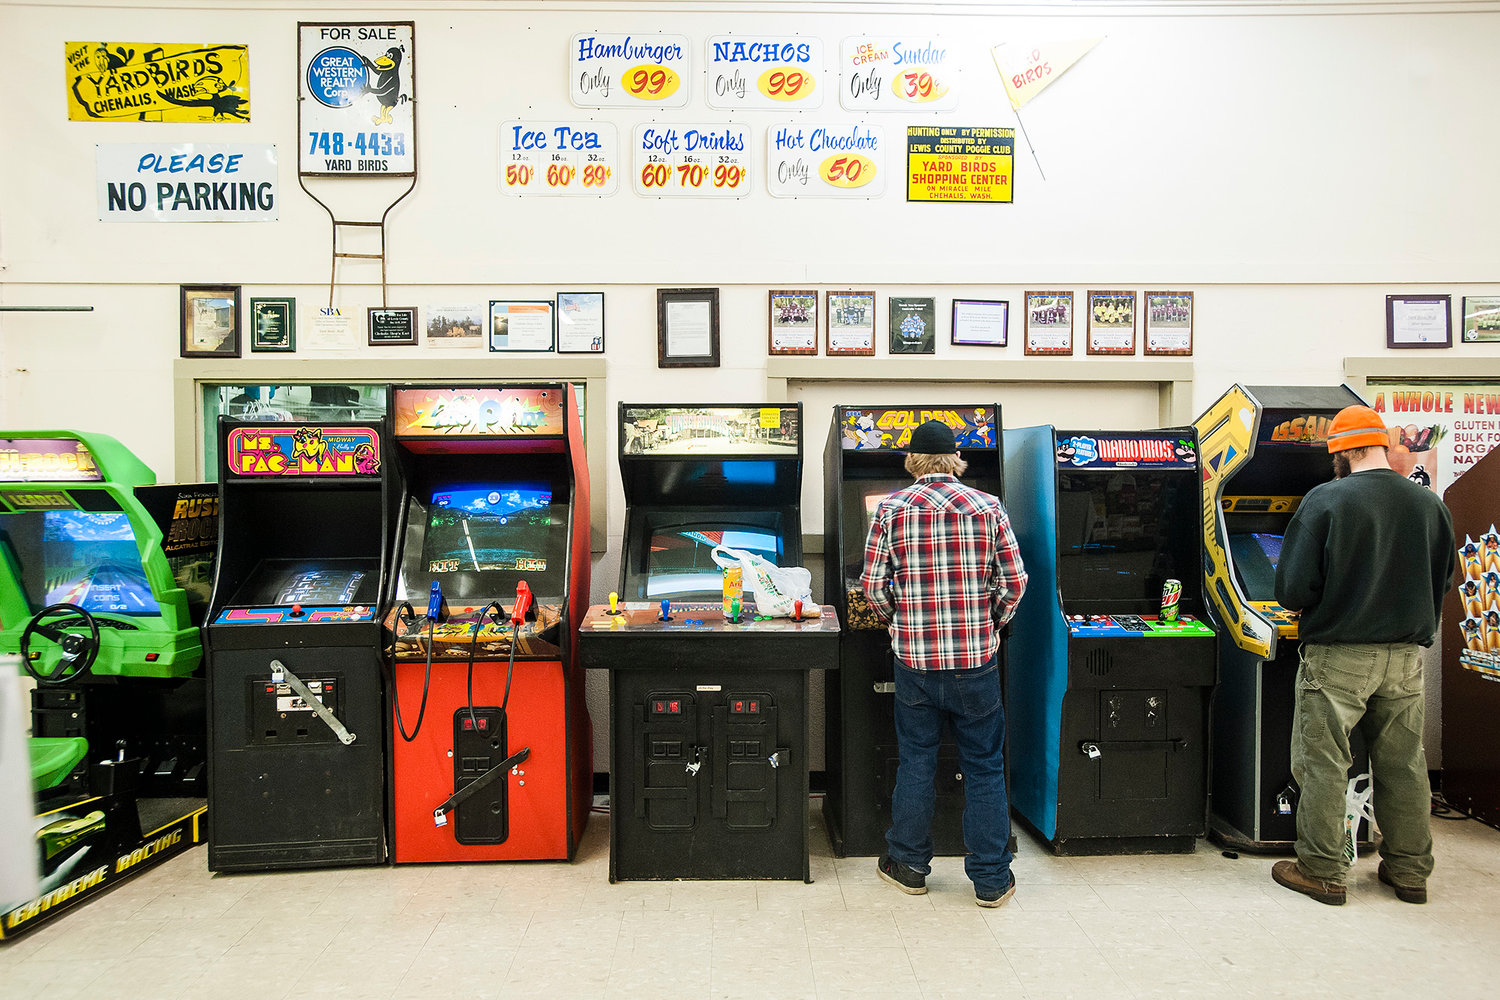 People play arcade games at Yard Birds Mall in Chehalis on Monday, March 3, 2014.